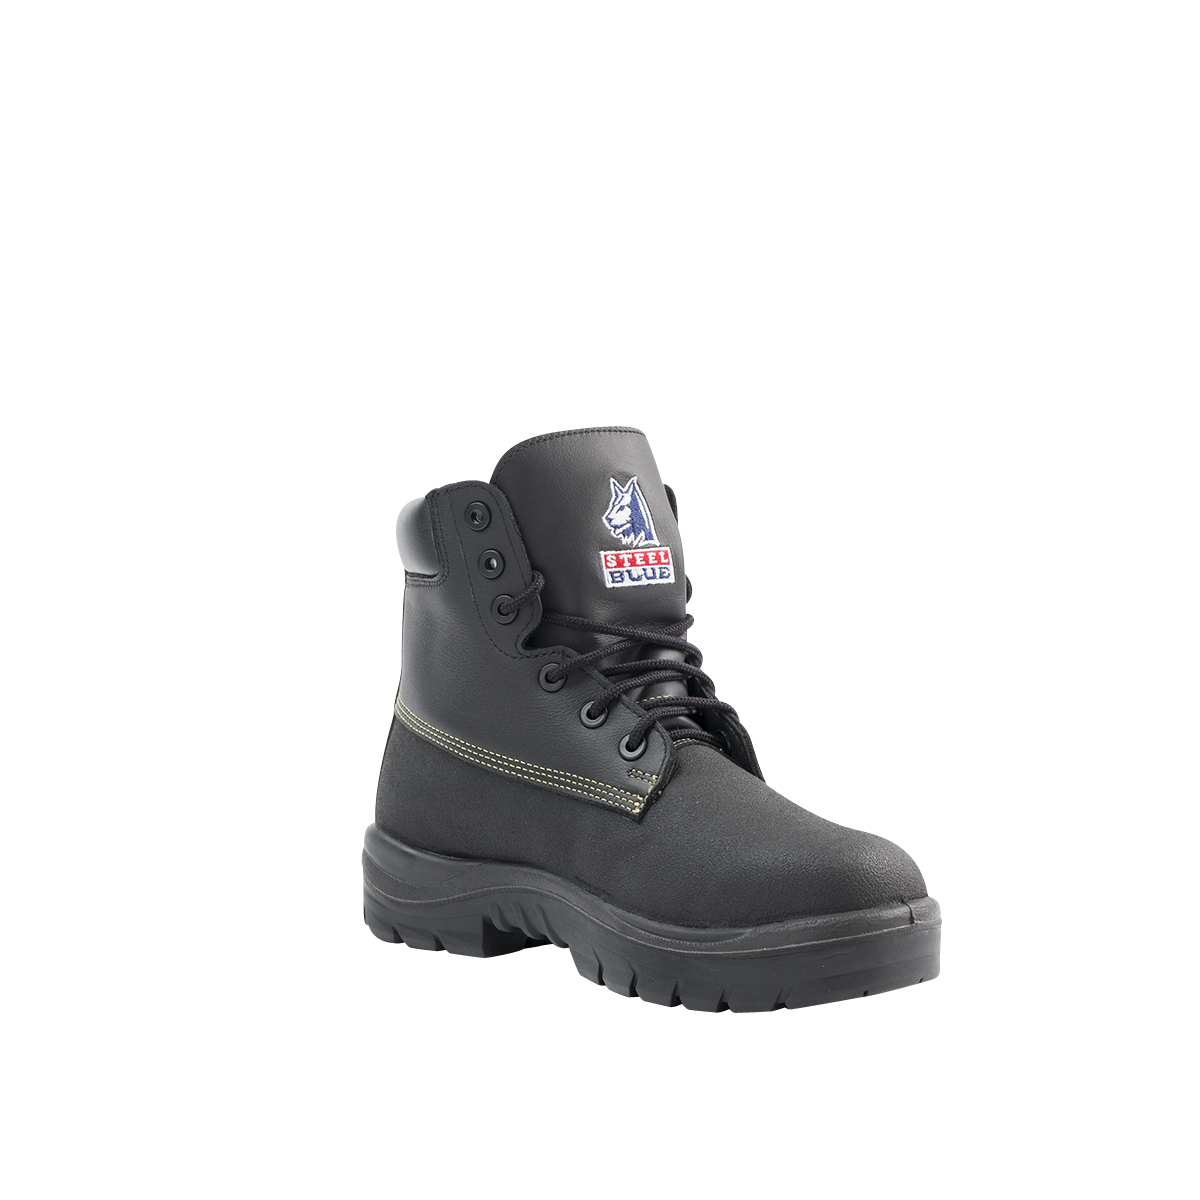 SAFETY BOOT WARRAGUL BLACK S10 -LACE UP CHEMICAL RESIST